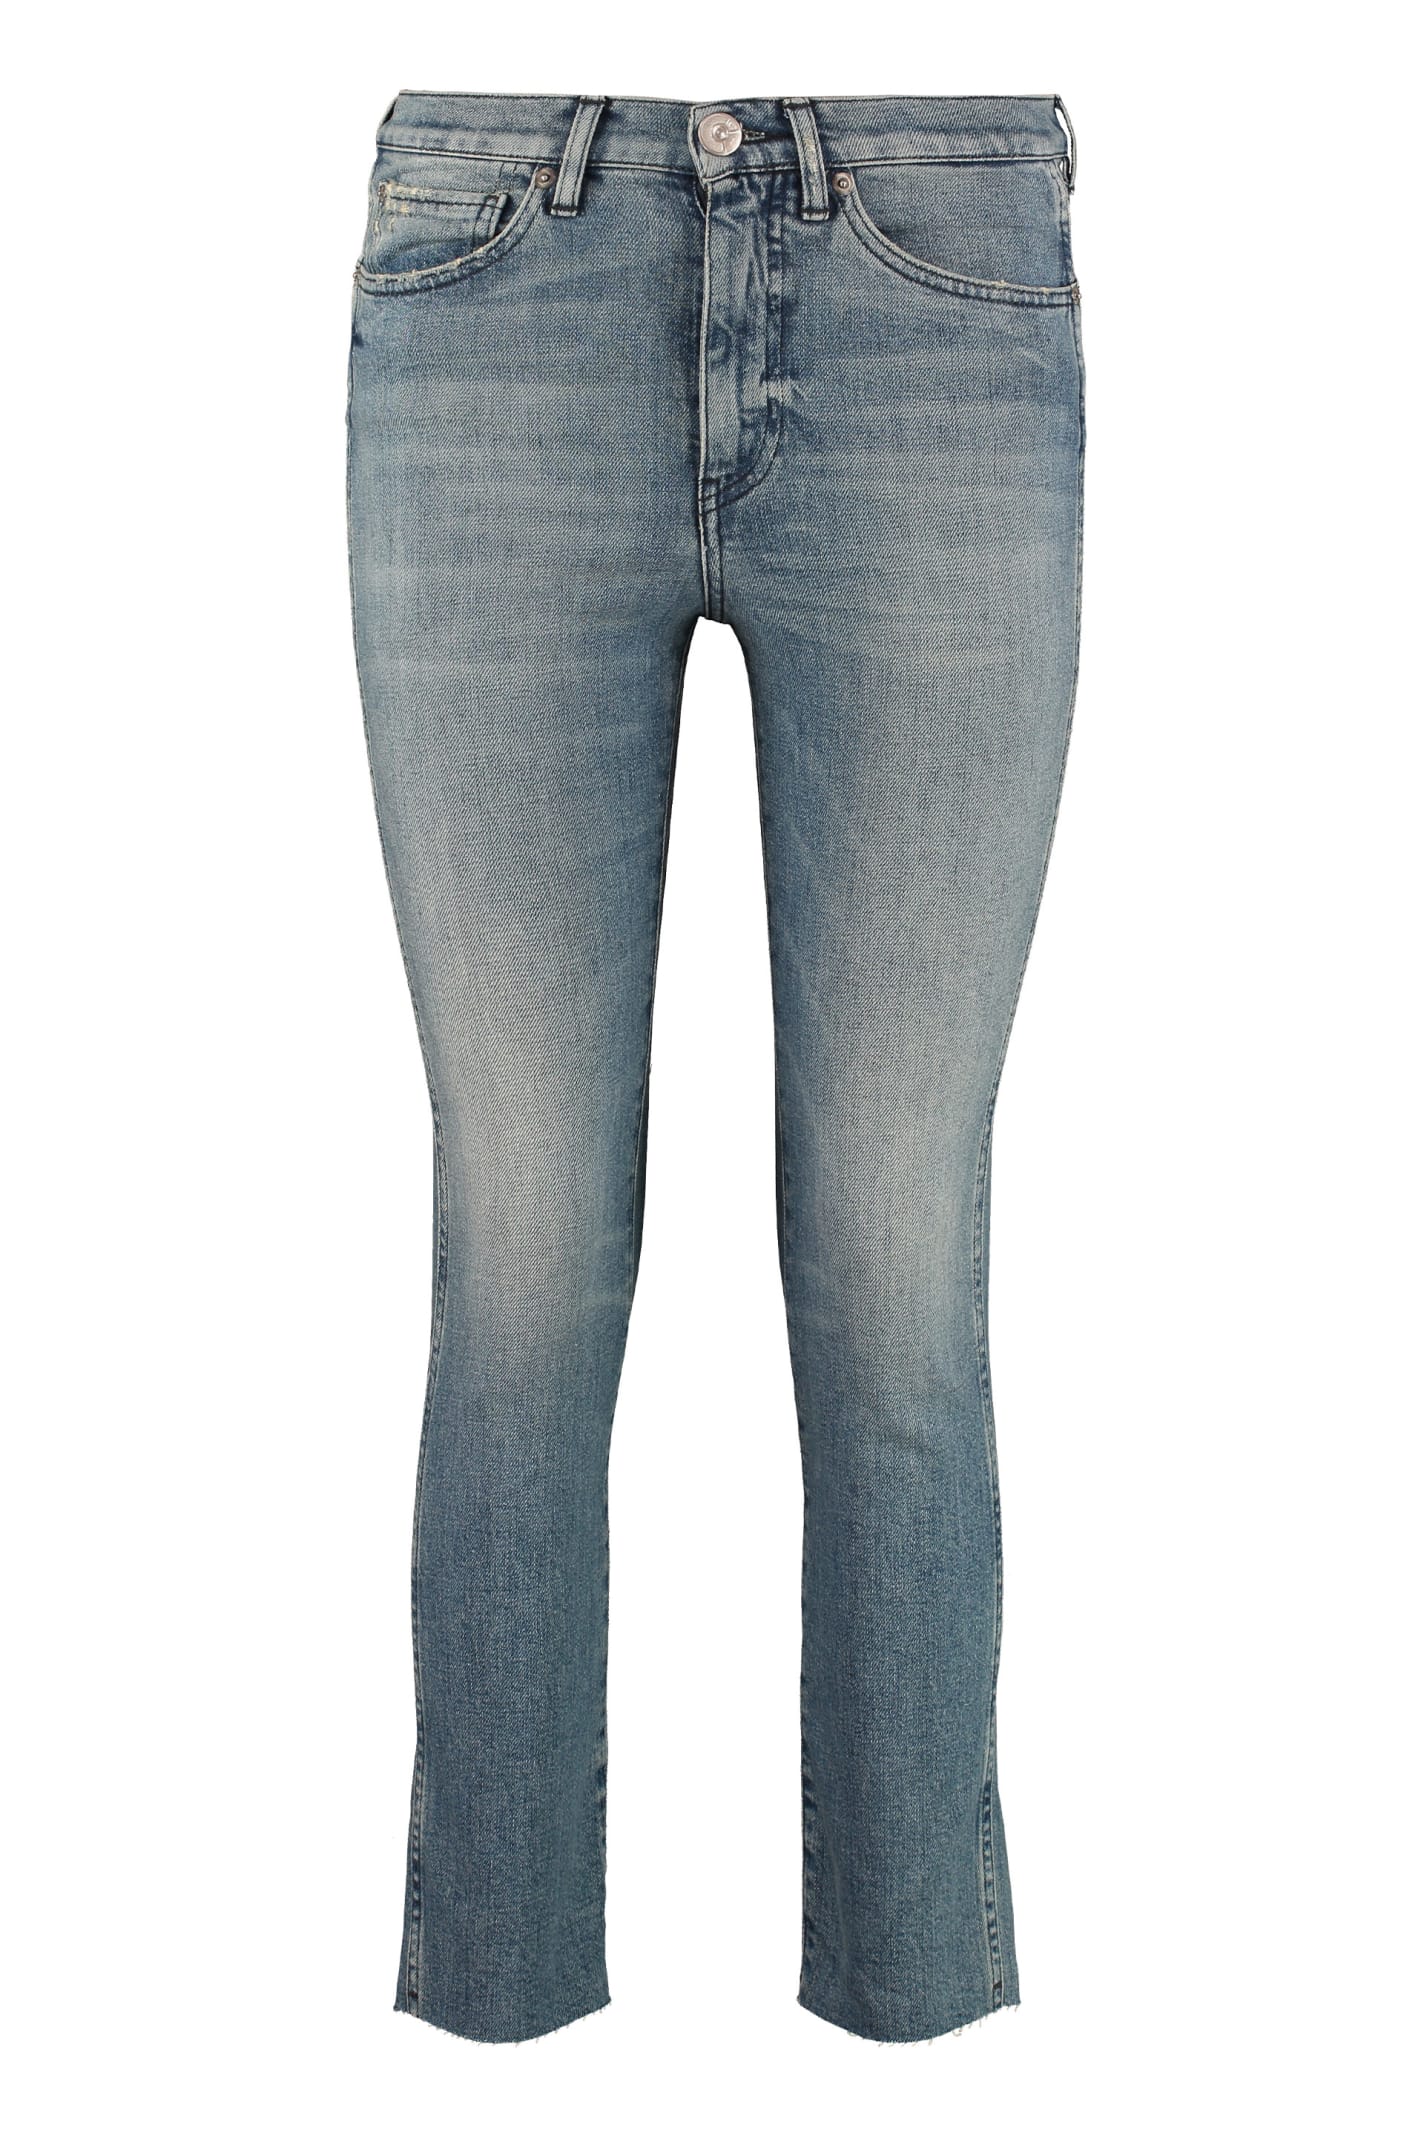 3x1 High-rise Straight Ankle Jeans